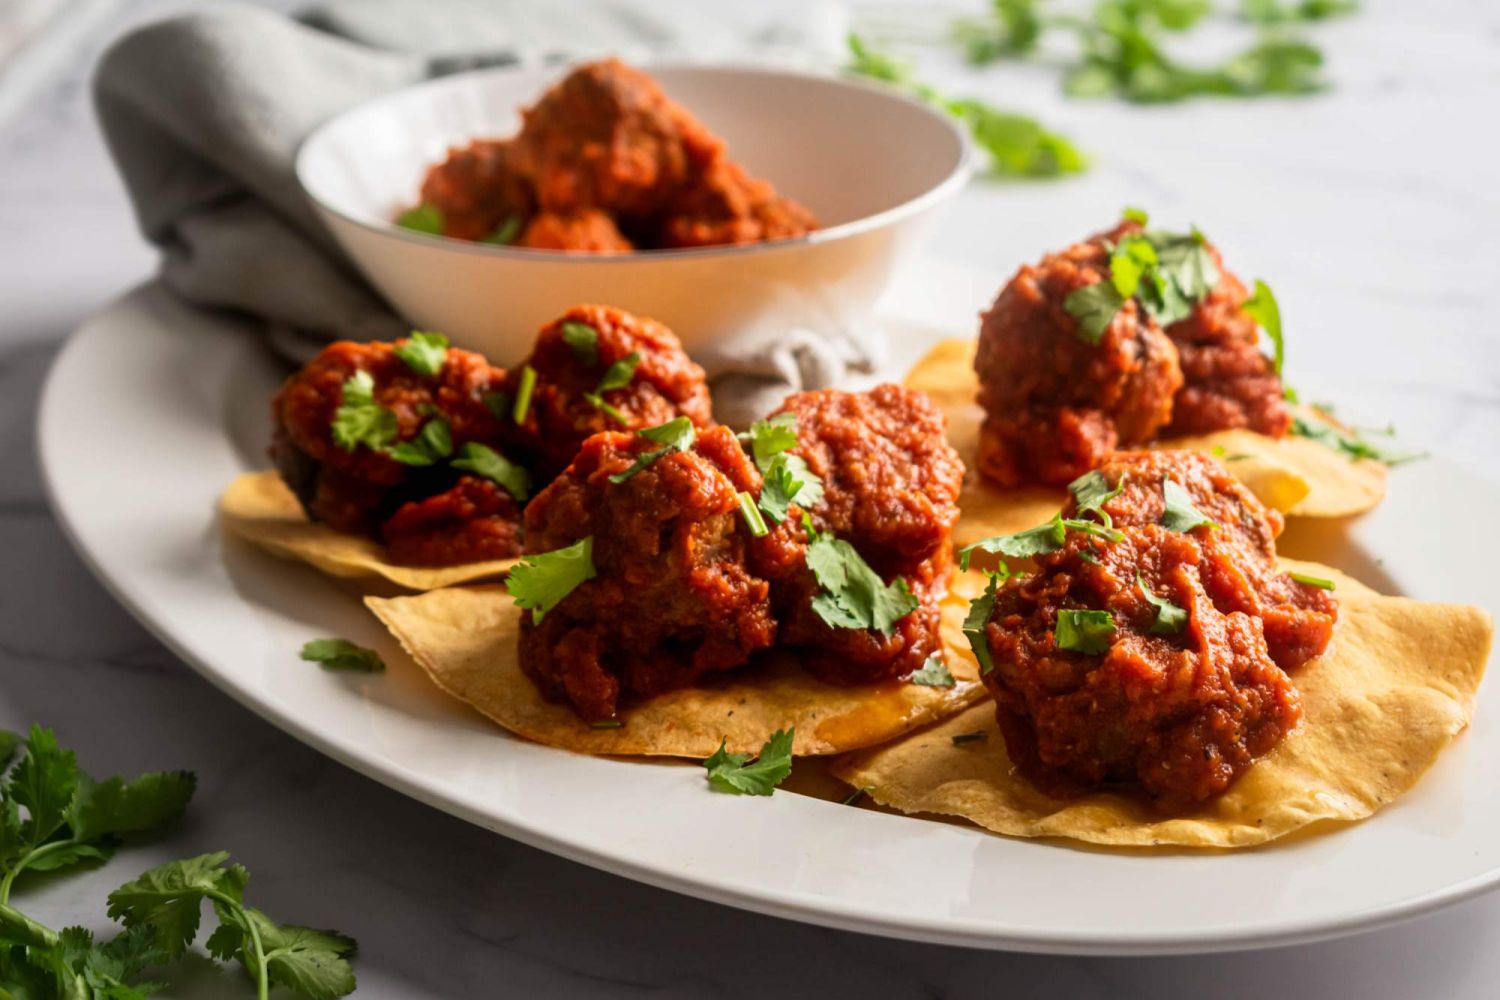 Meatballs simmered in a Mexican chipotle sauce and served on corn tortillas with chopped cilantro.